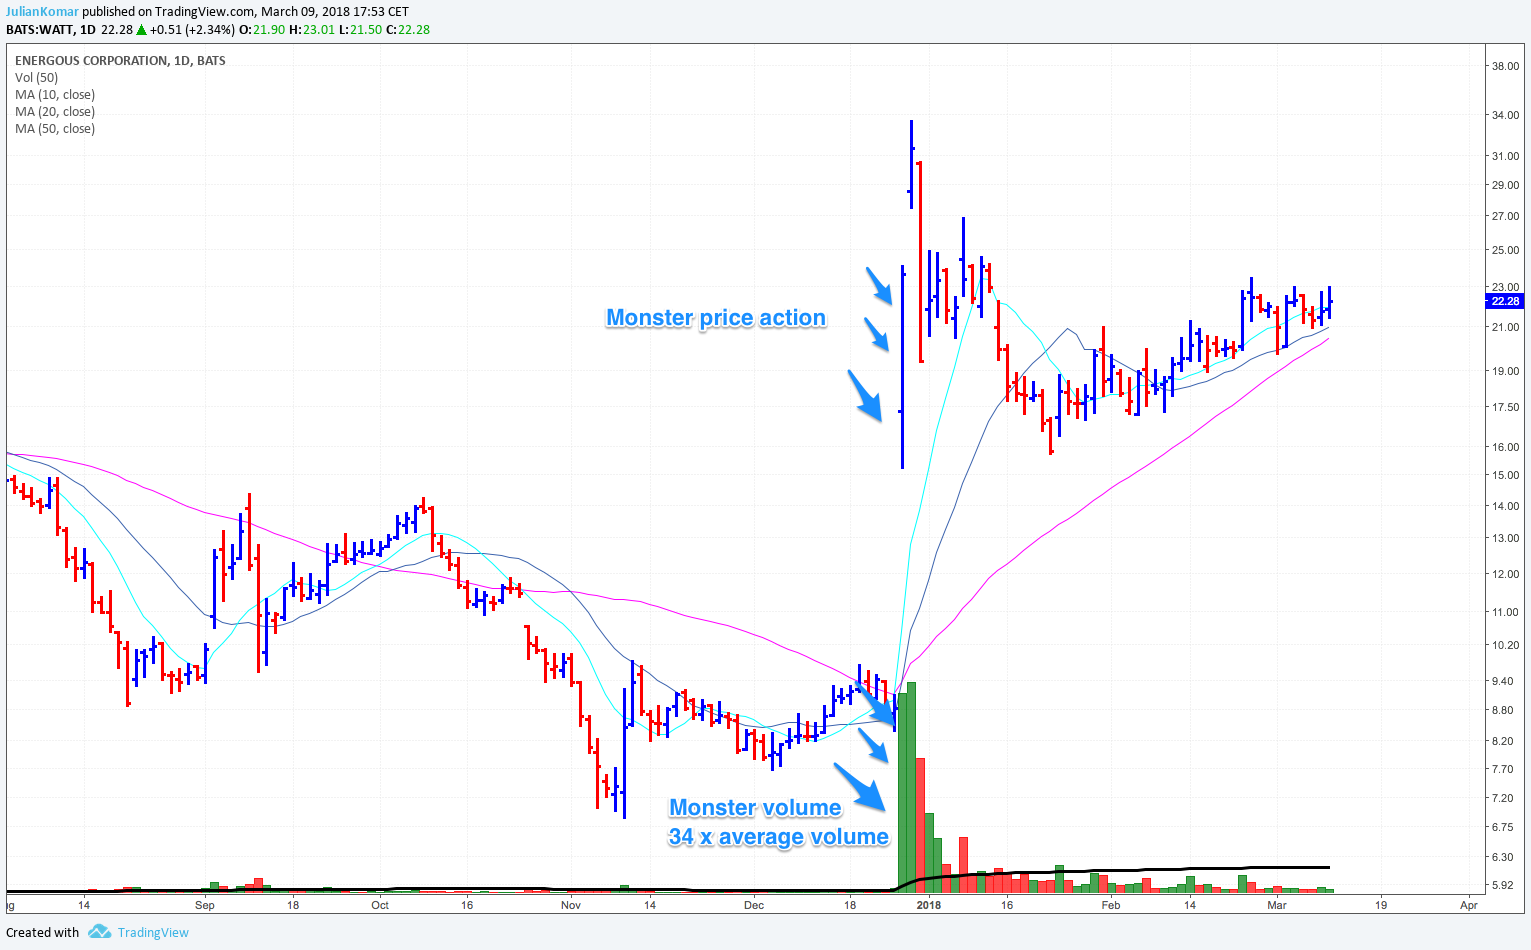 Monster price and volume action in a stock.